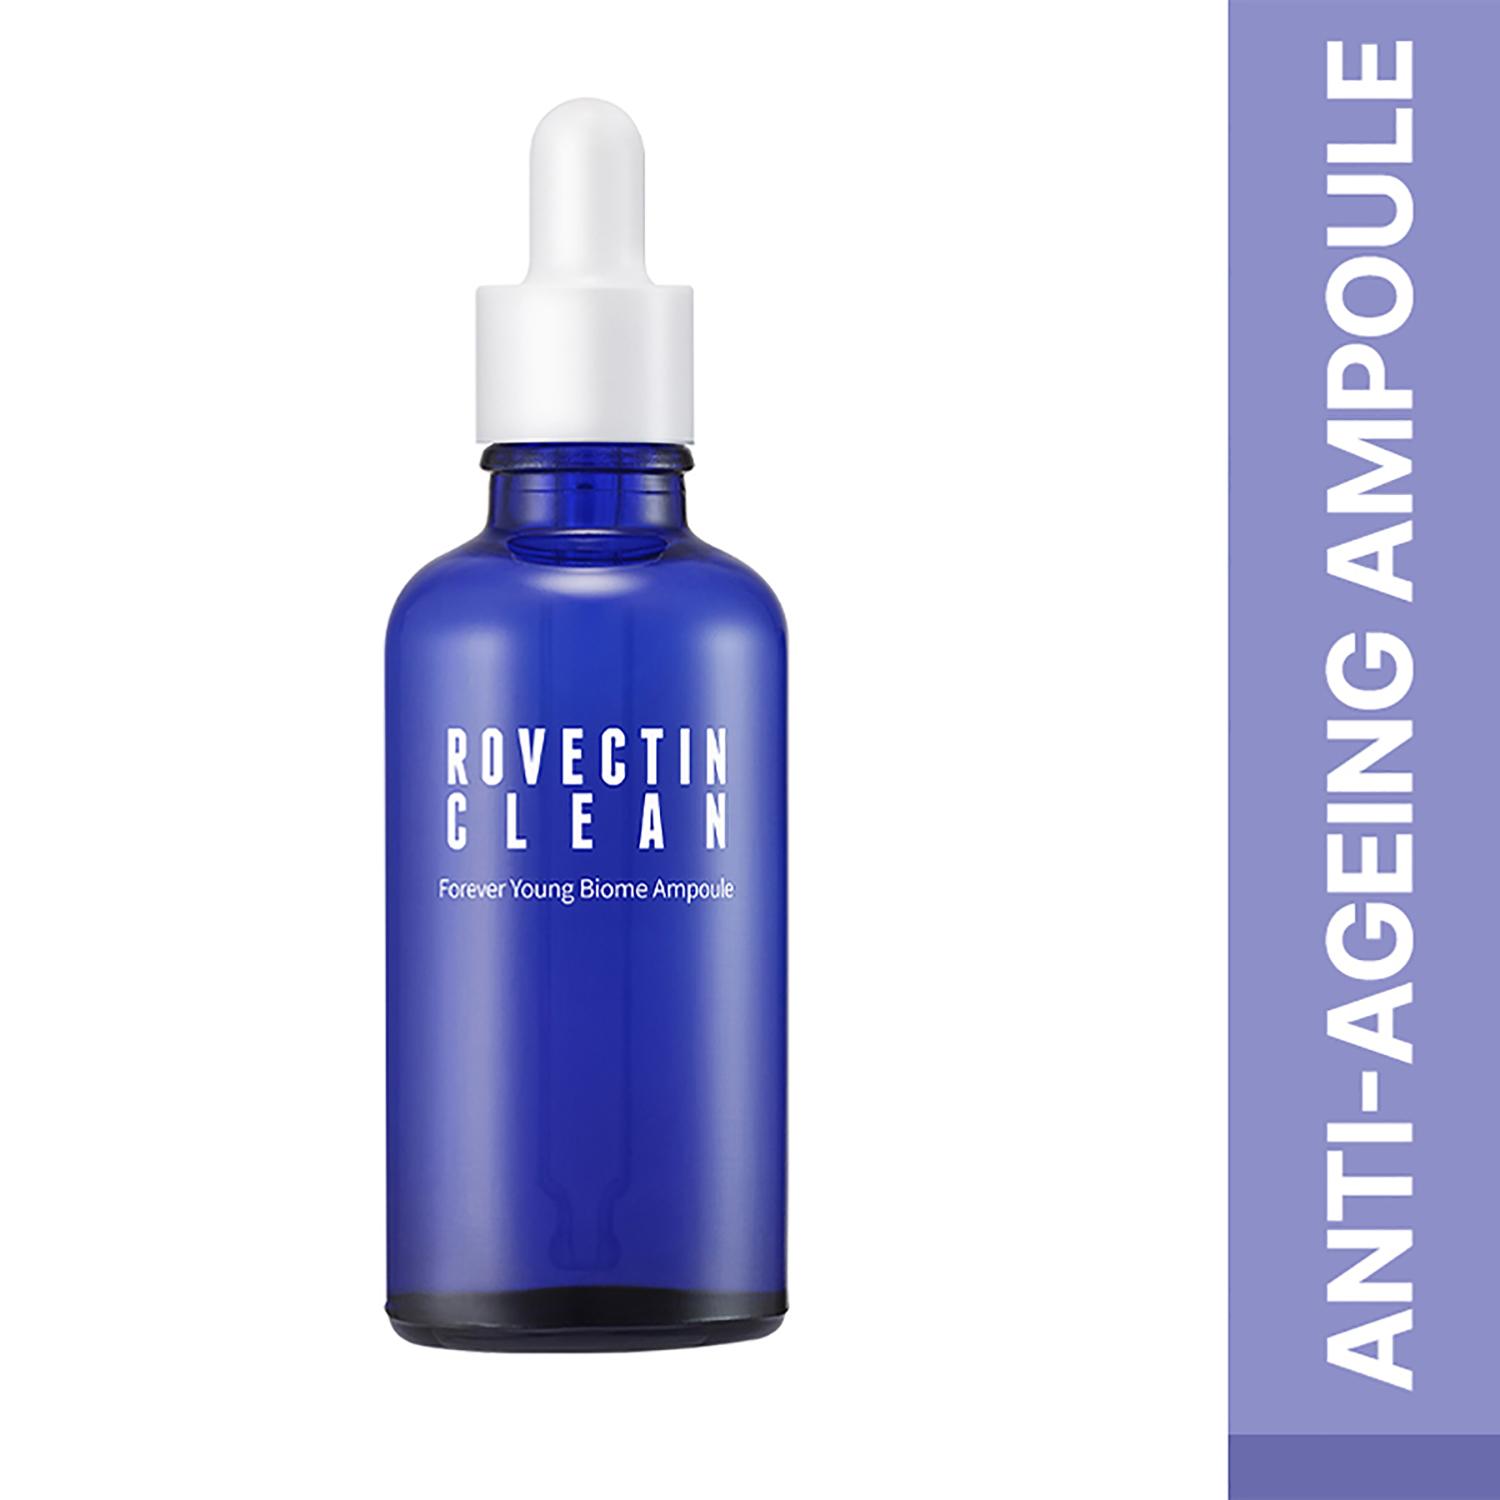 Rovectin | Rovectin Clean Forever Young Biome Ampoule (50ml)